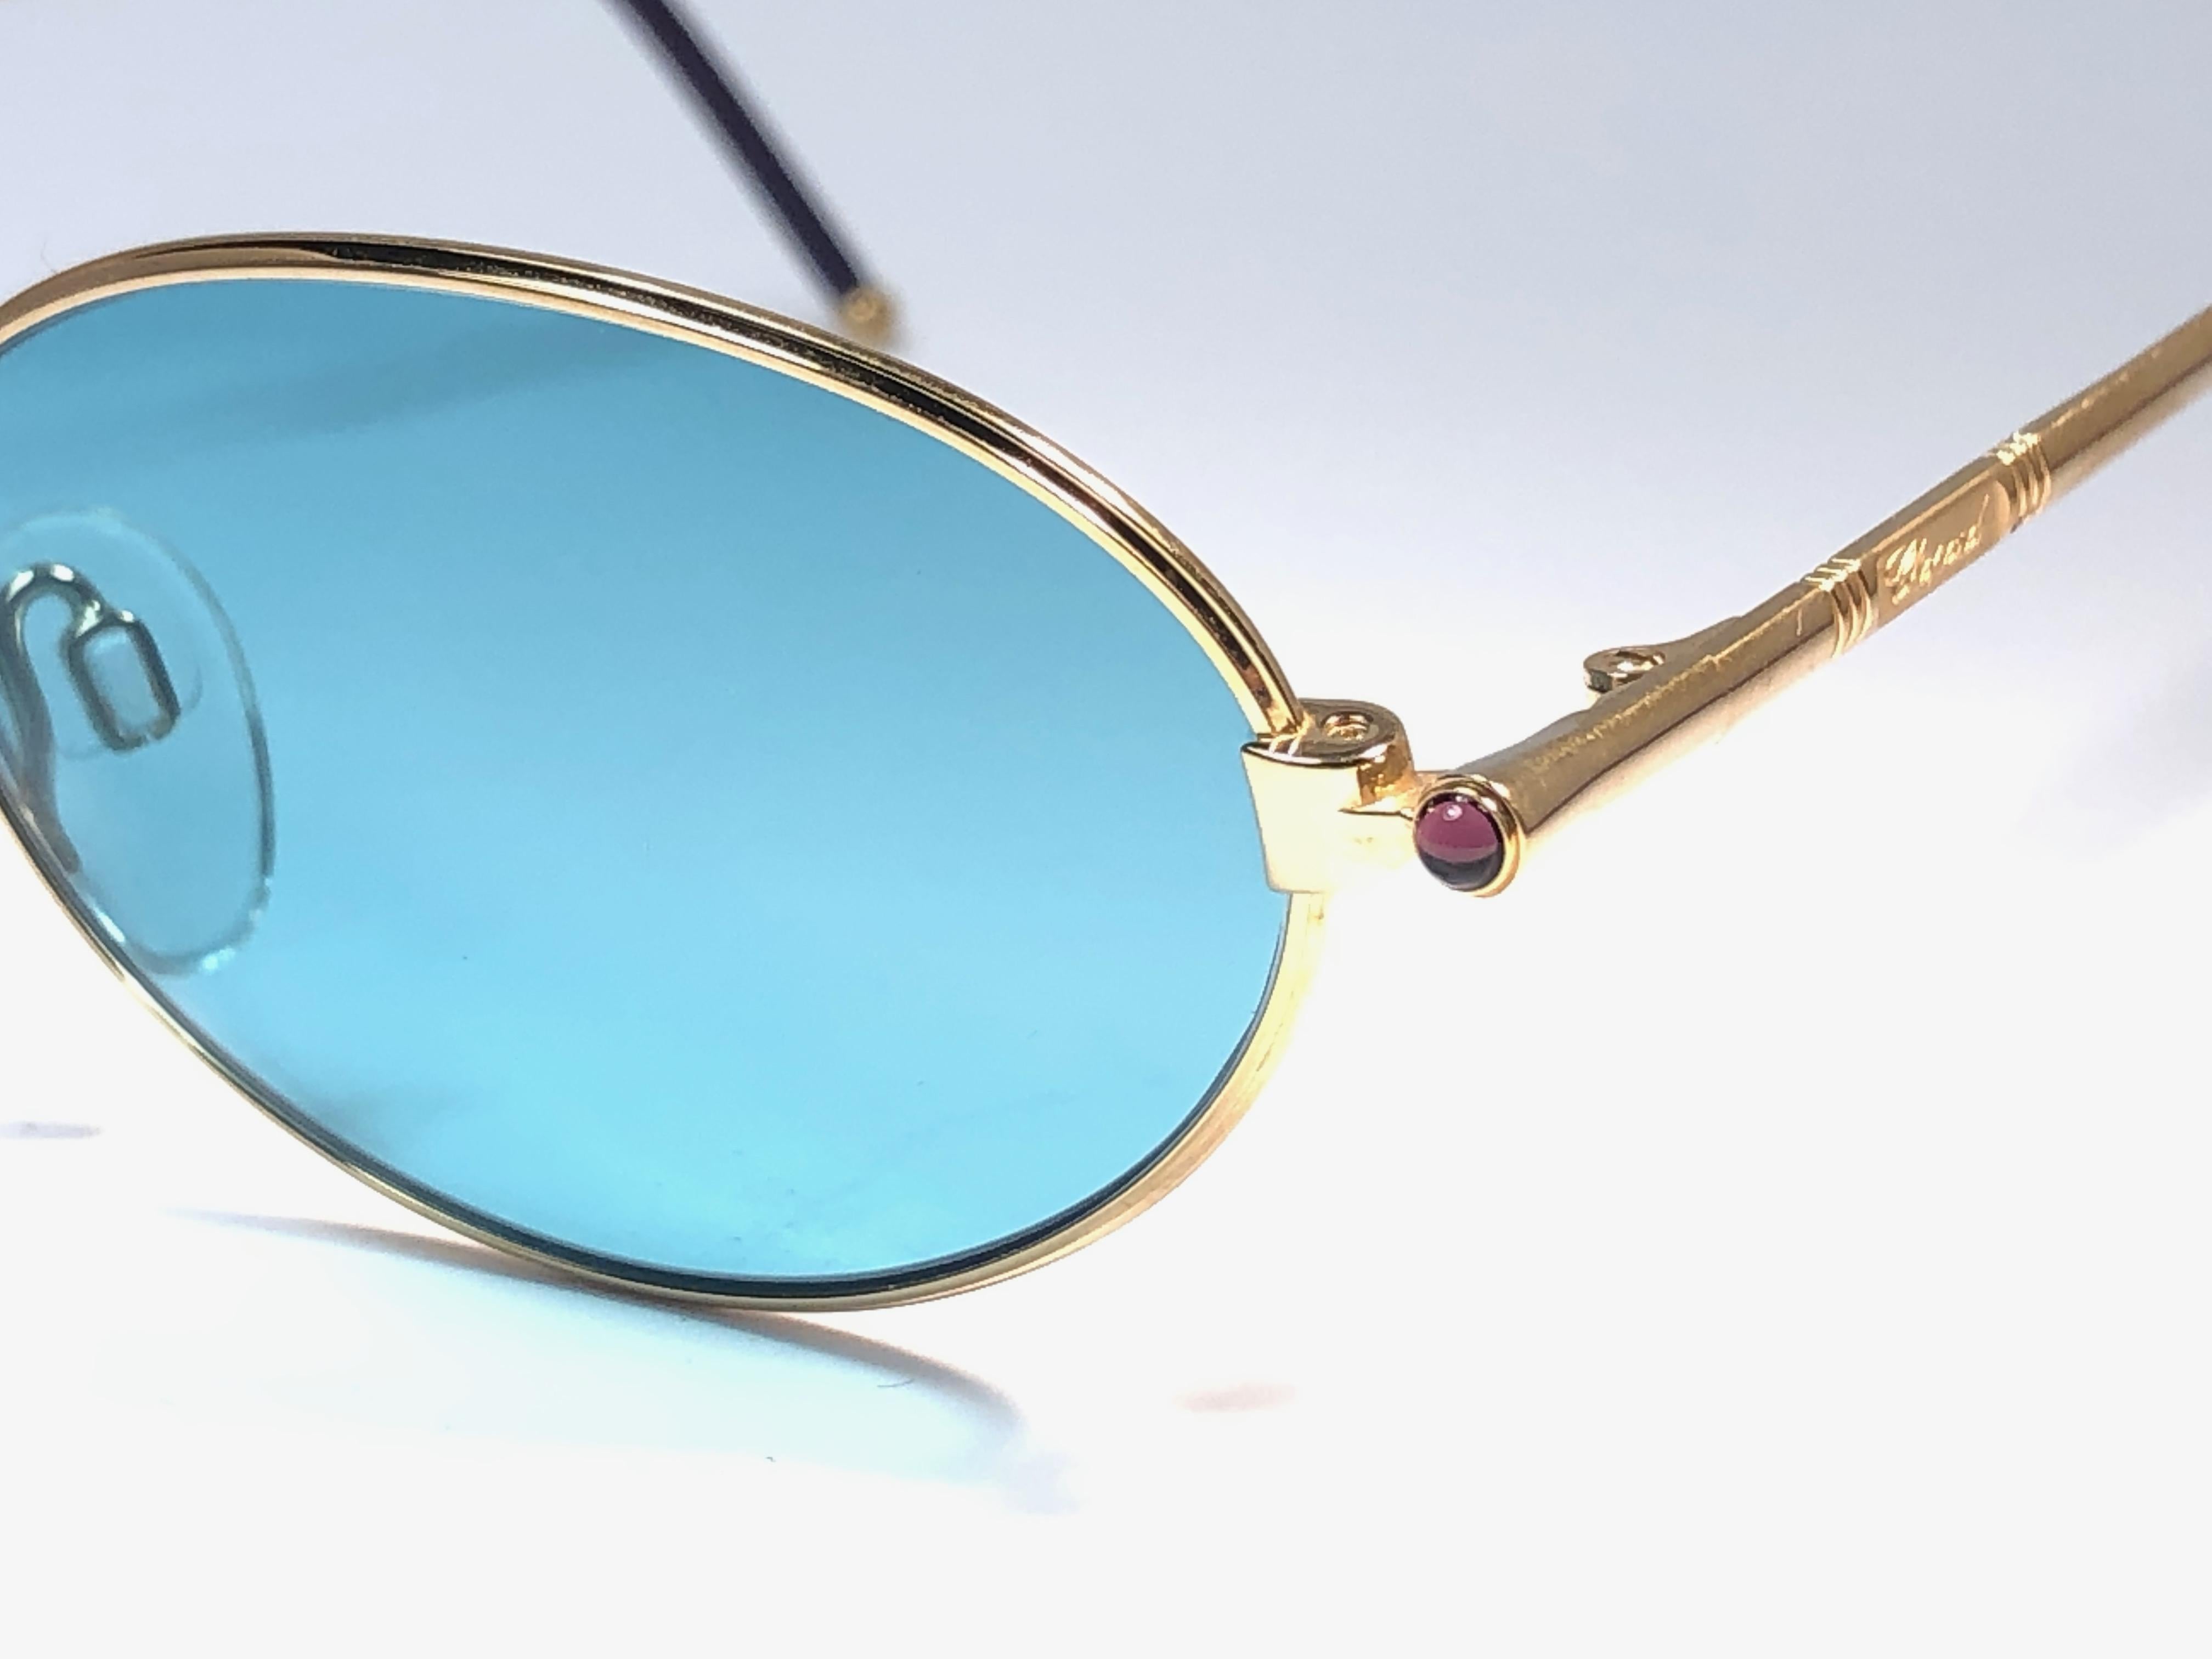 New Vintage Chopard MC003 Oval 23k Plated Gold 1990 Sunglasses Made in Austria 2